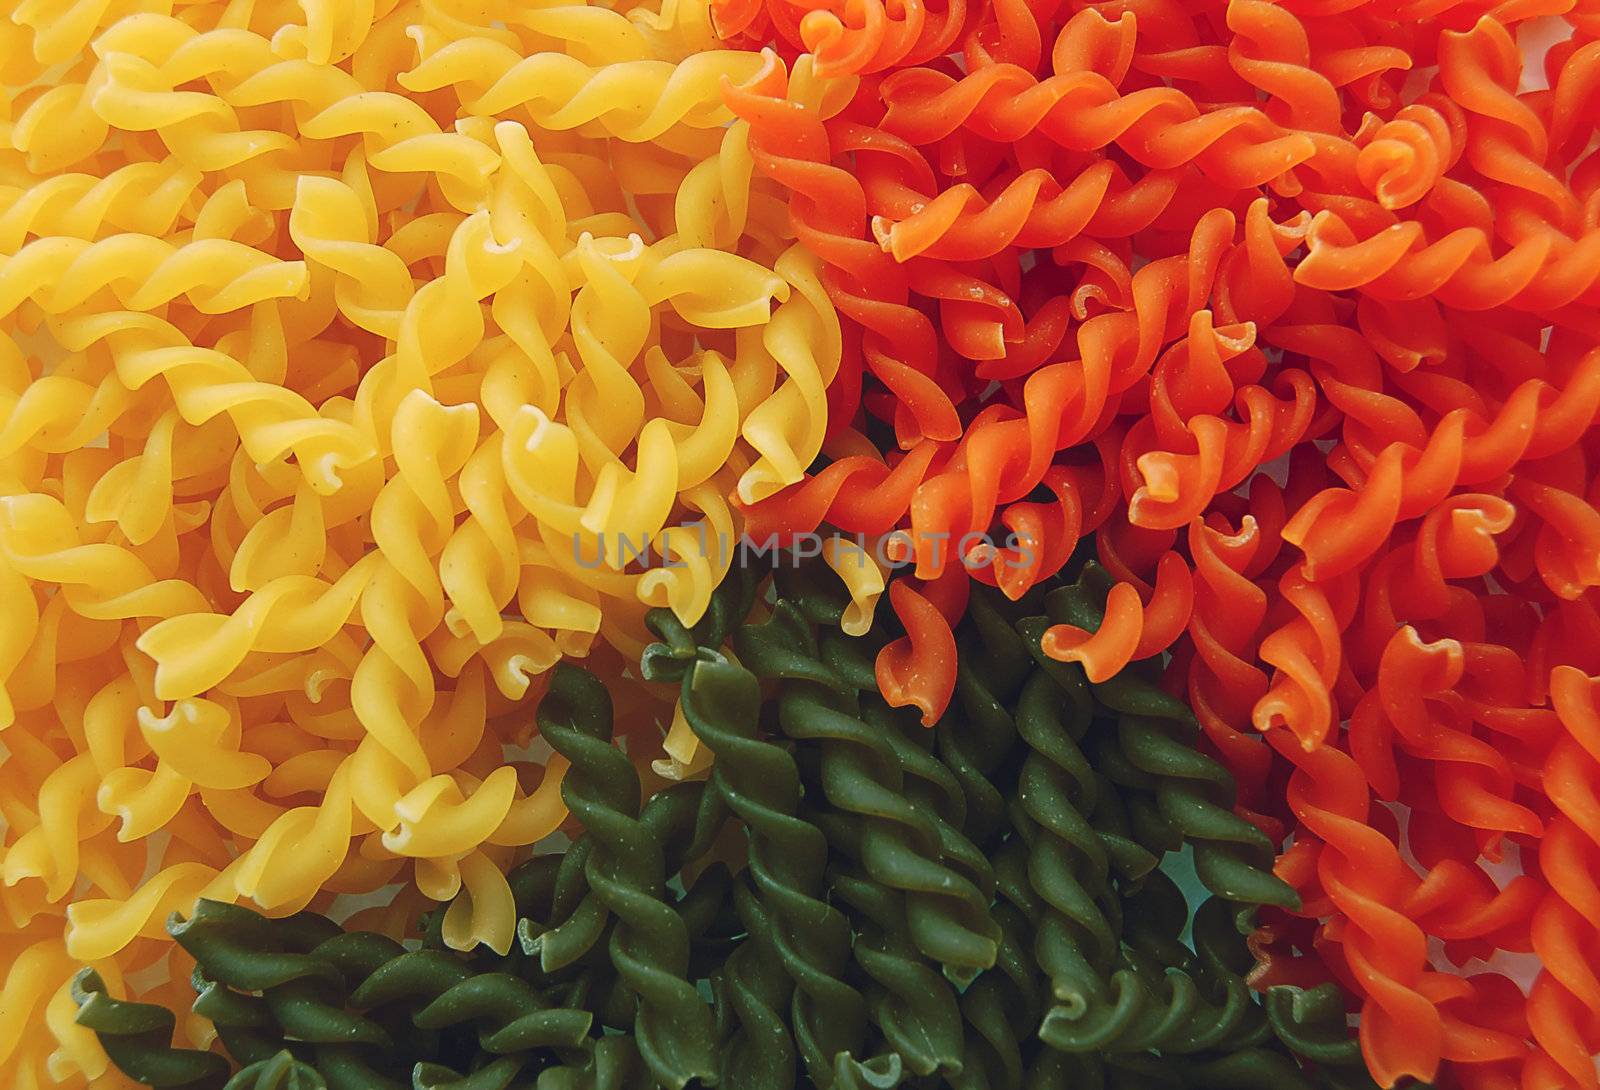 colored noodles by mettus